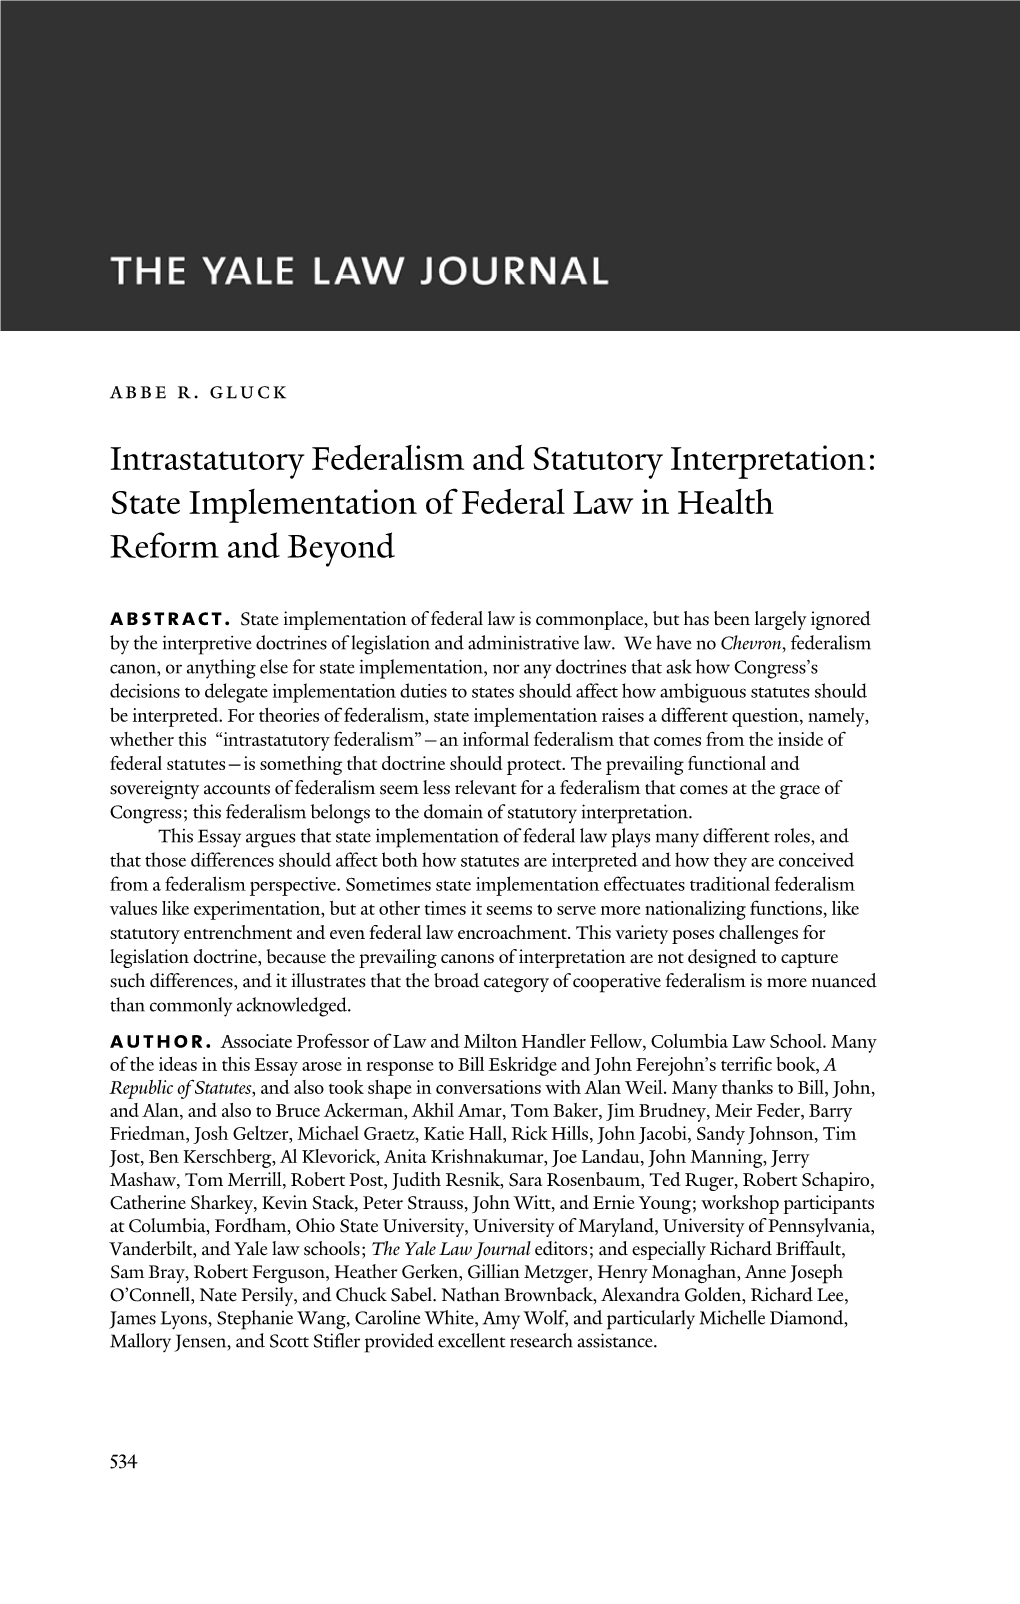 Intrastatutory Federalism and Statutory Interpretation: State Implementation of Federal Law in Health Reform and Beyond Abstract